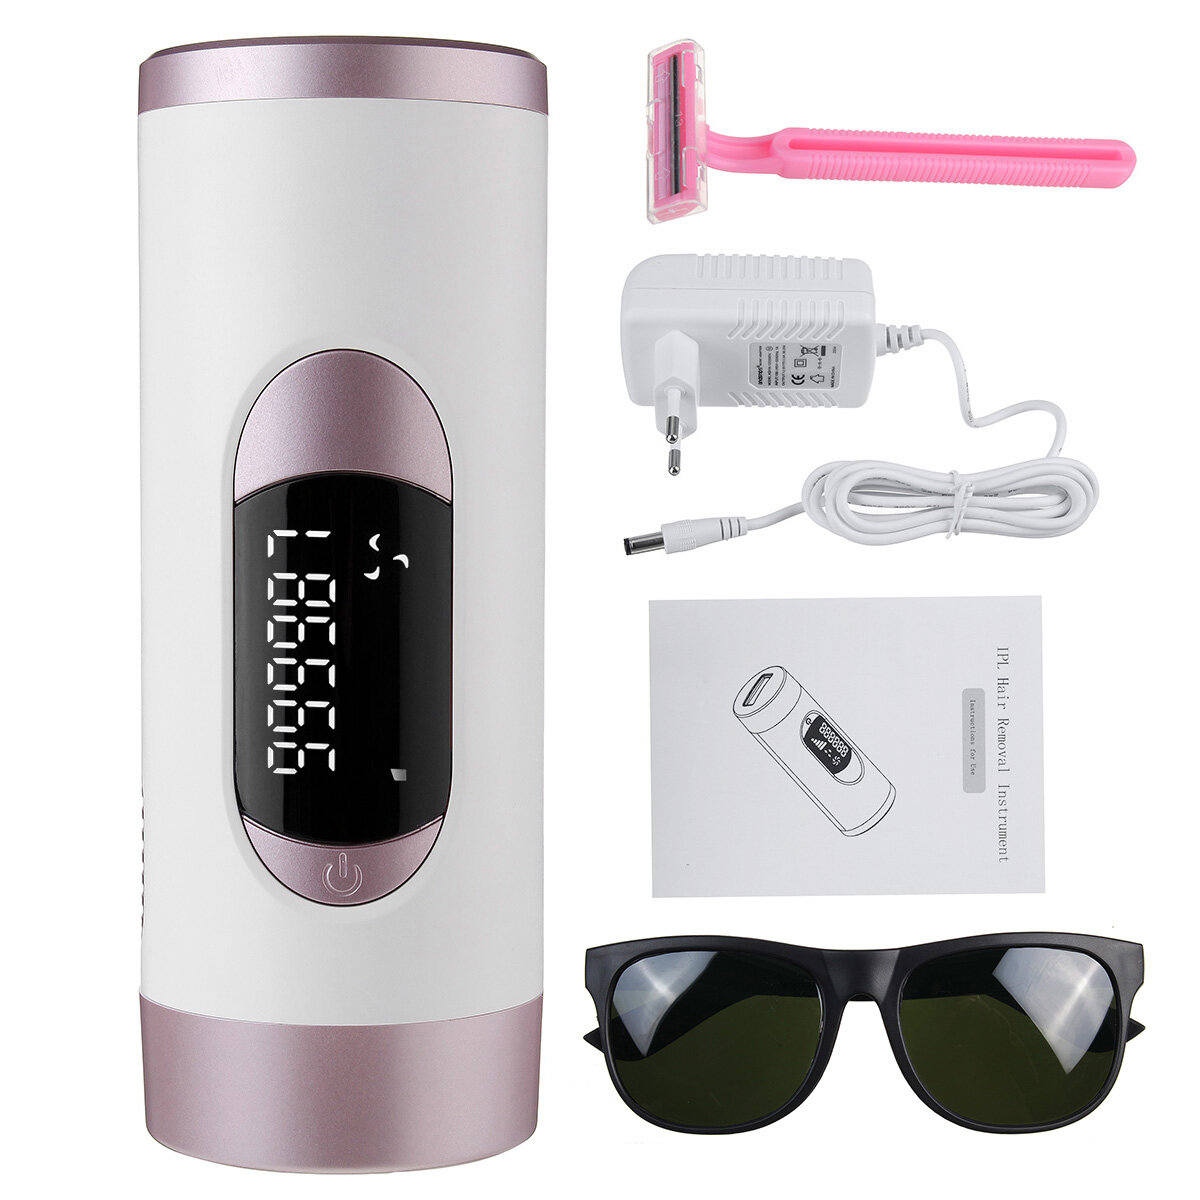 Image of 5 Gears 999999 Flashes IPL Laser Epilator Hair Removal Device Permanent Painless Full Body Hair Remover